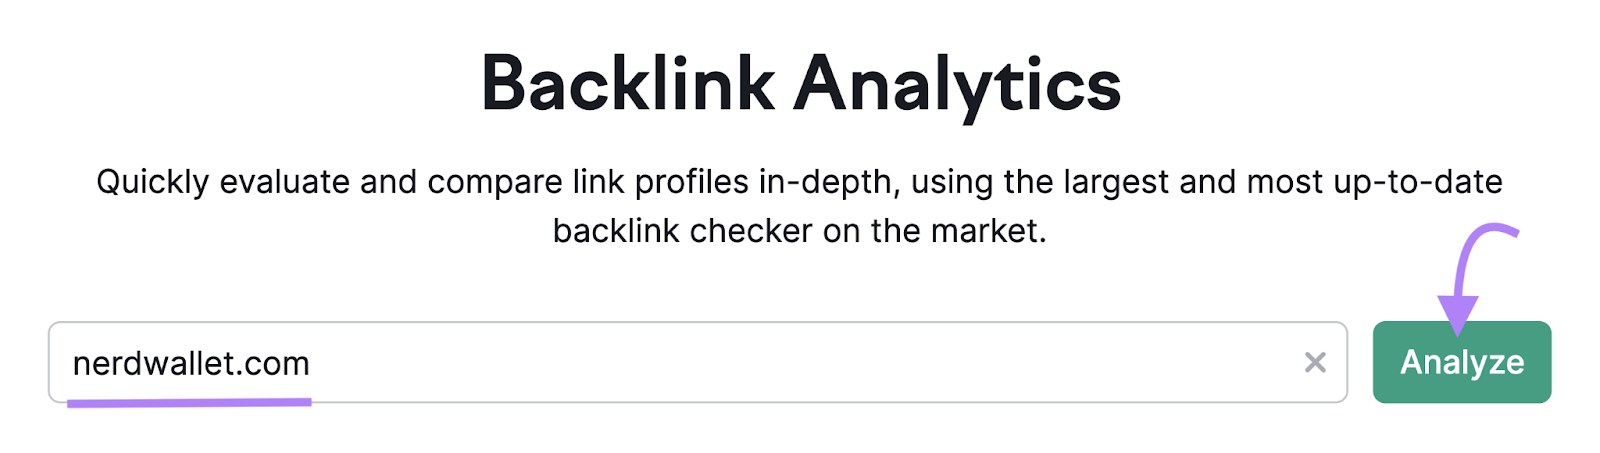 "nerdwallet.com" entered into the Backlink Analytics tool search bar